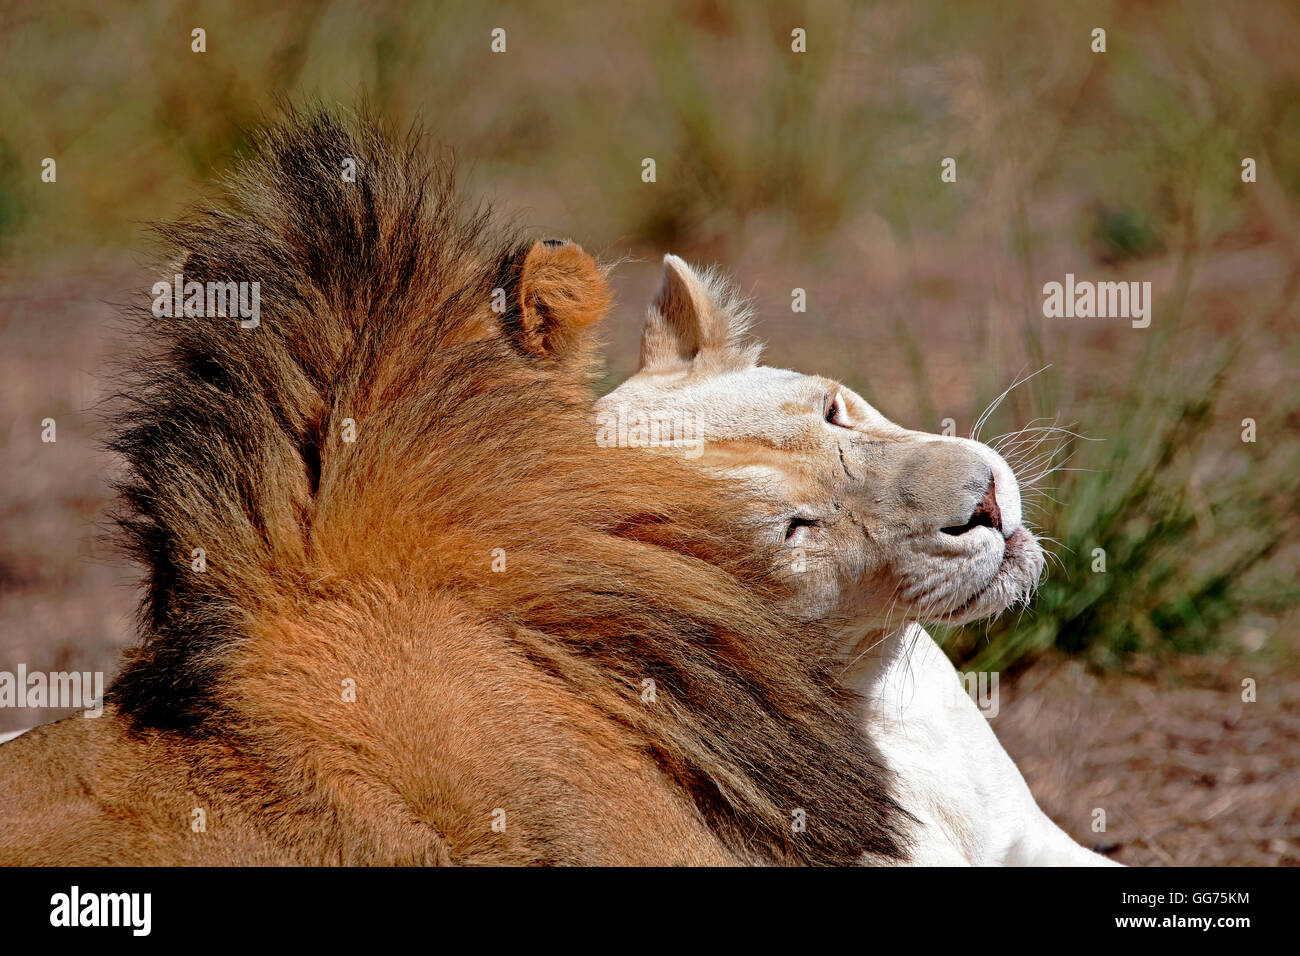 A white lioness's (Panthera leo) head against a male lion at the Drakenstein Lion Park, Paarl, Western Cape, South Africa Stock Photo